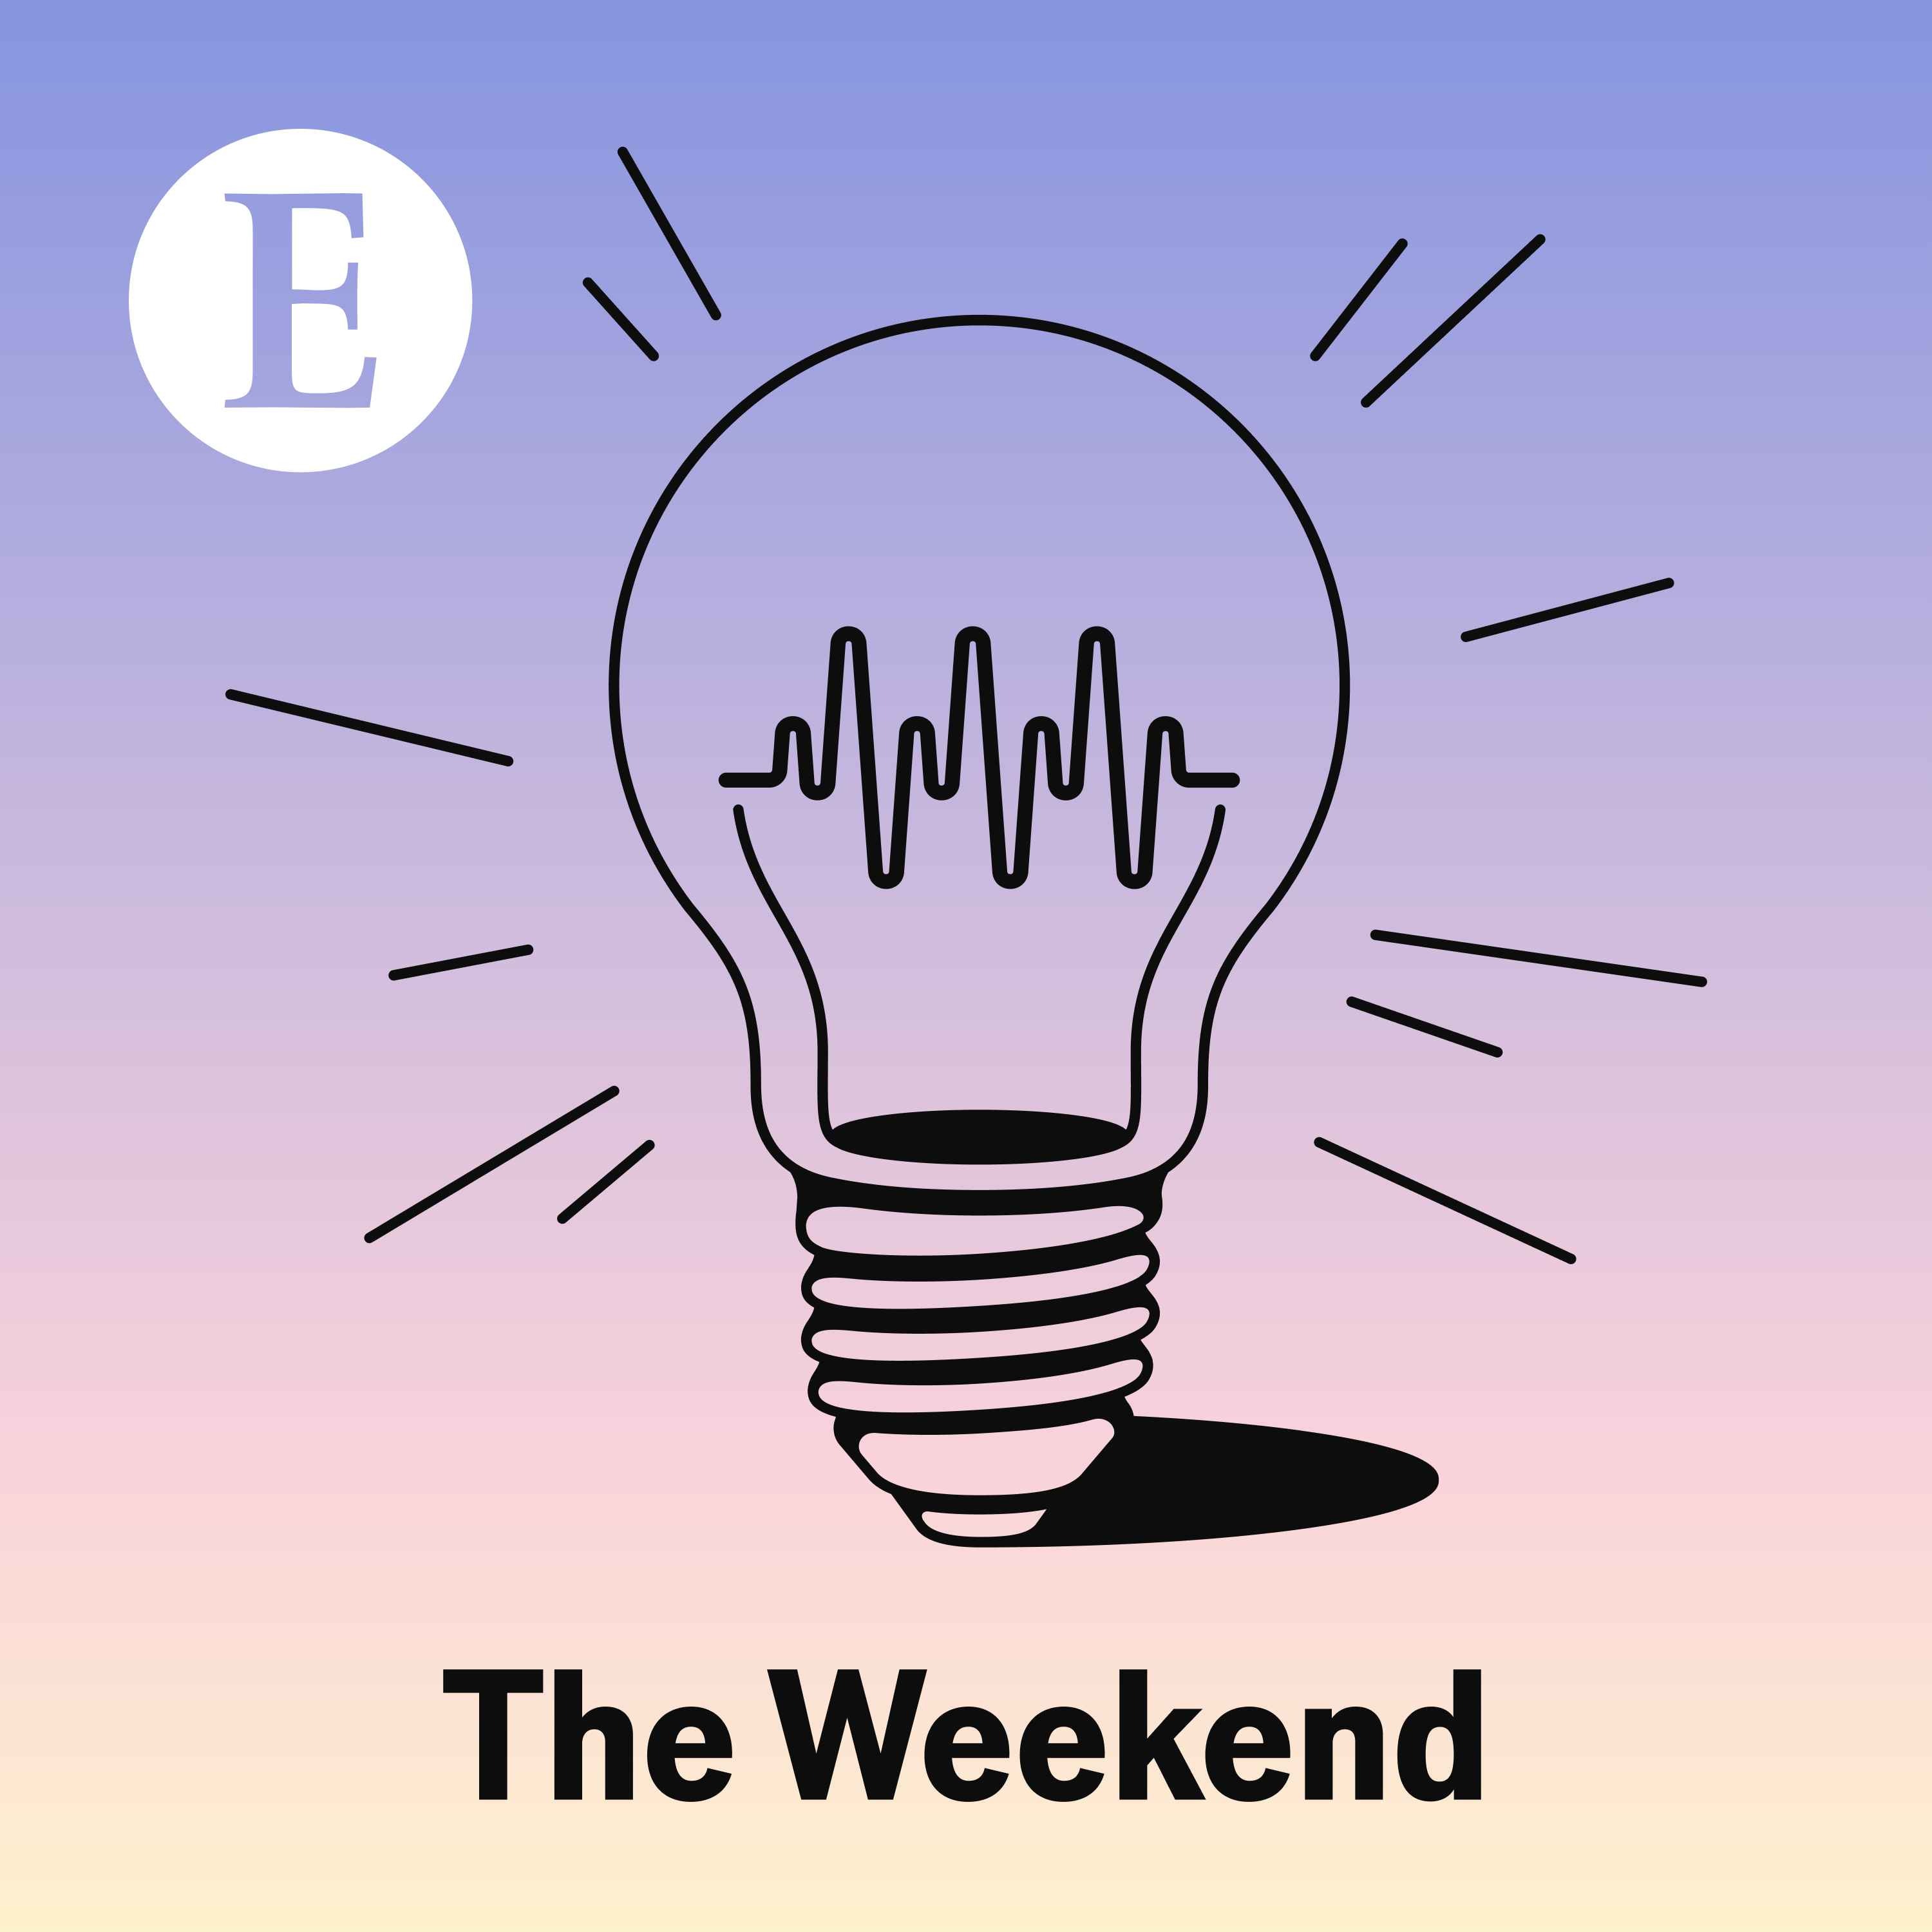 The Weekend Intelligence: Death in the forest